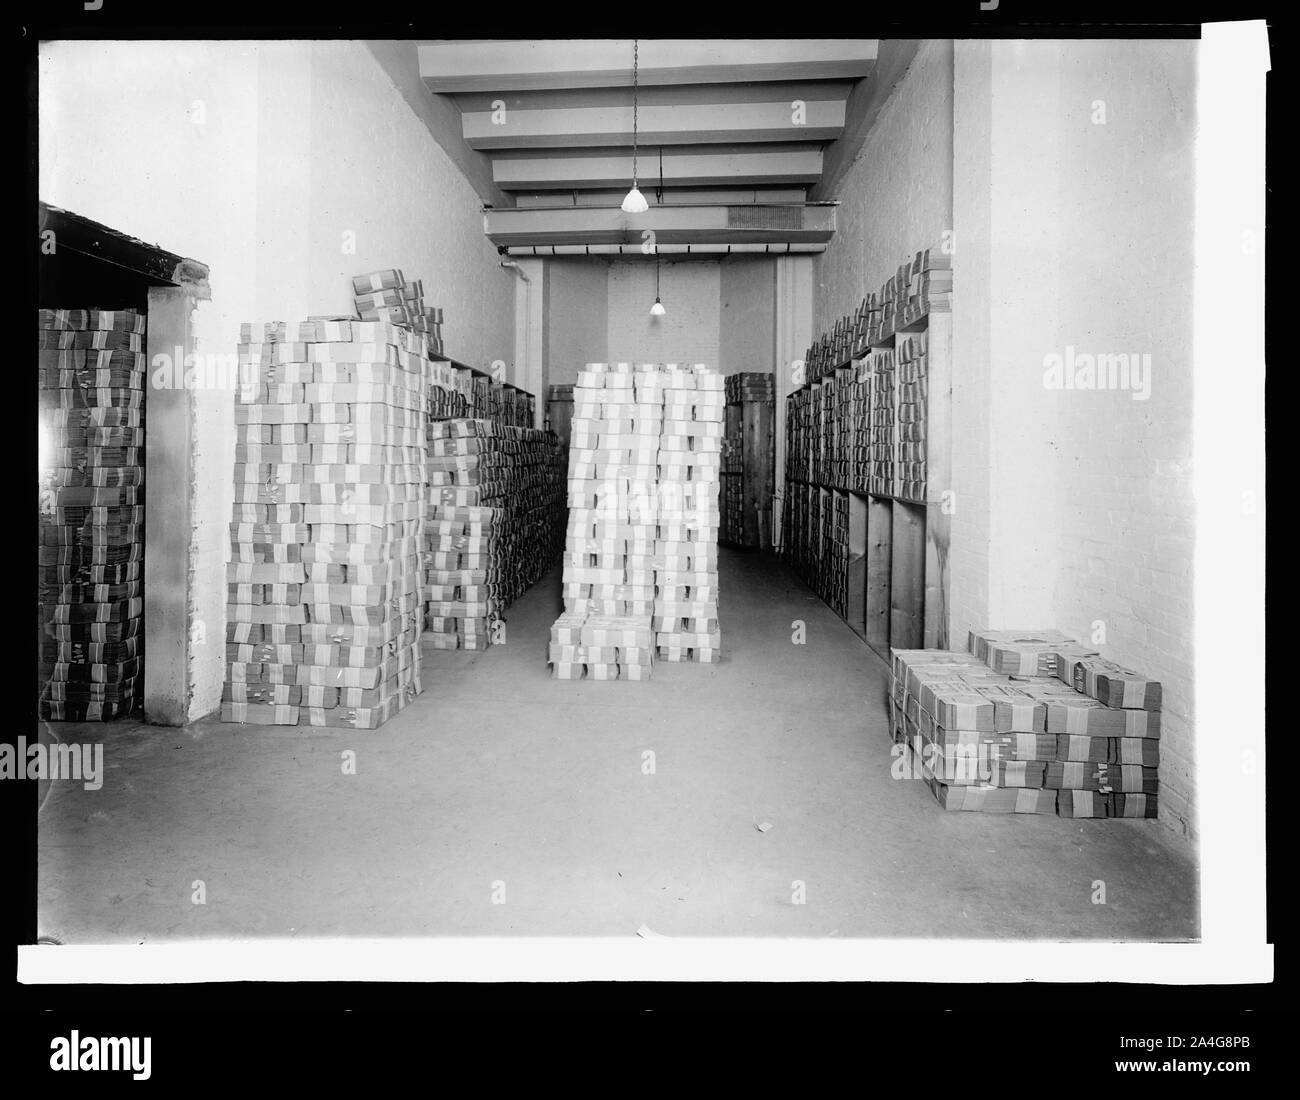 Treasury Dept. , Internal Revenue stamp vault: about 2,500,000 sheets of stamps in this vault when photographed, [1914] Stock Photo